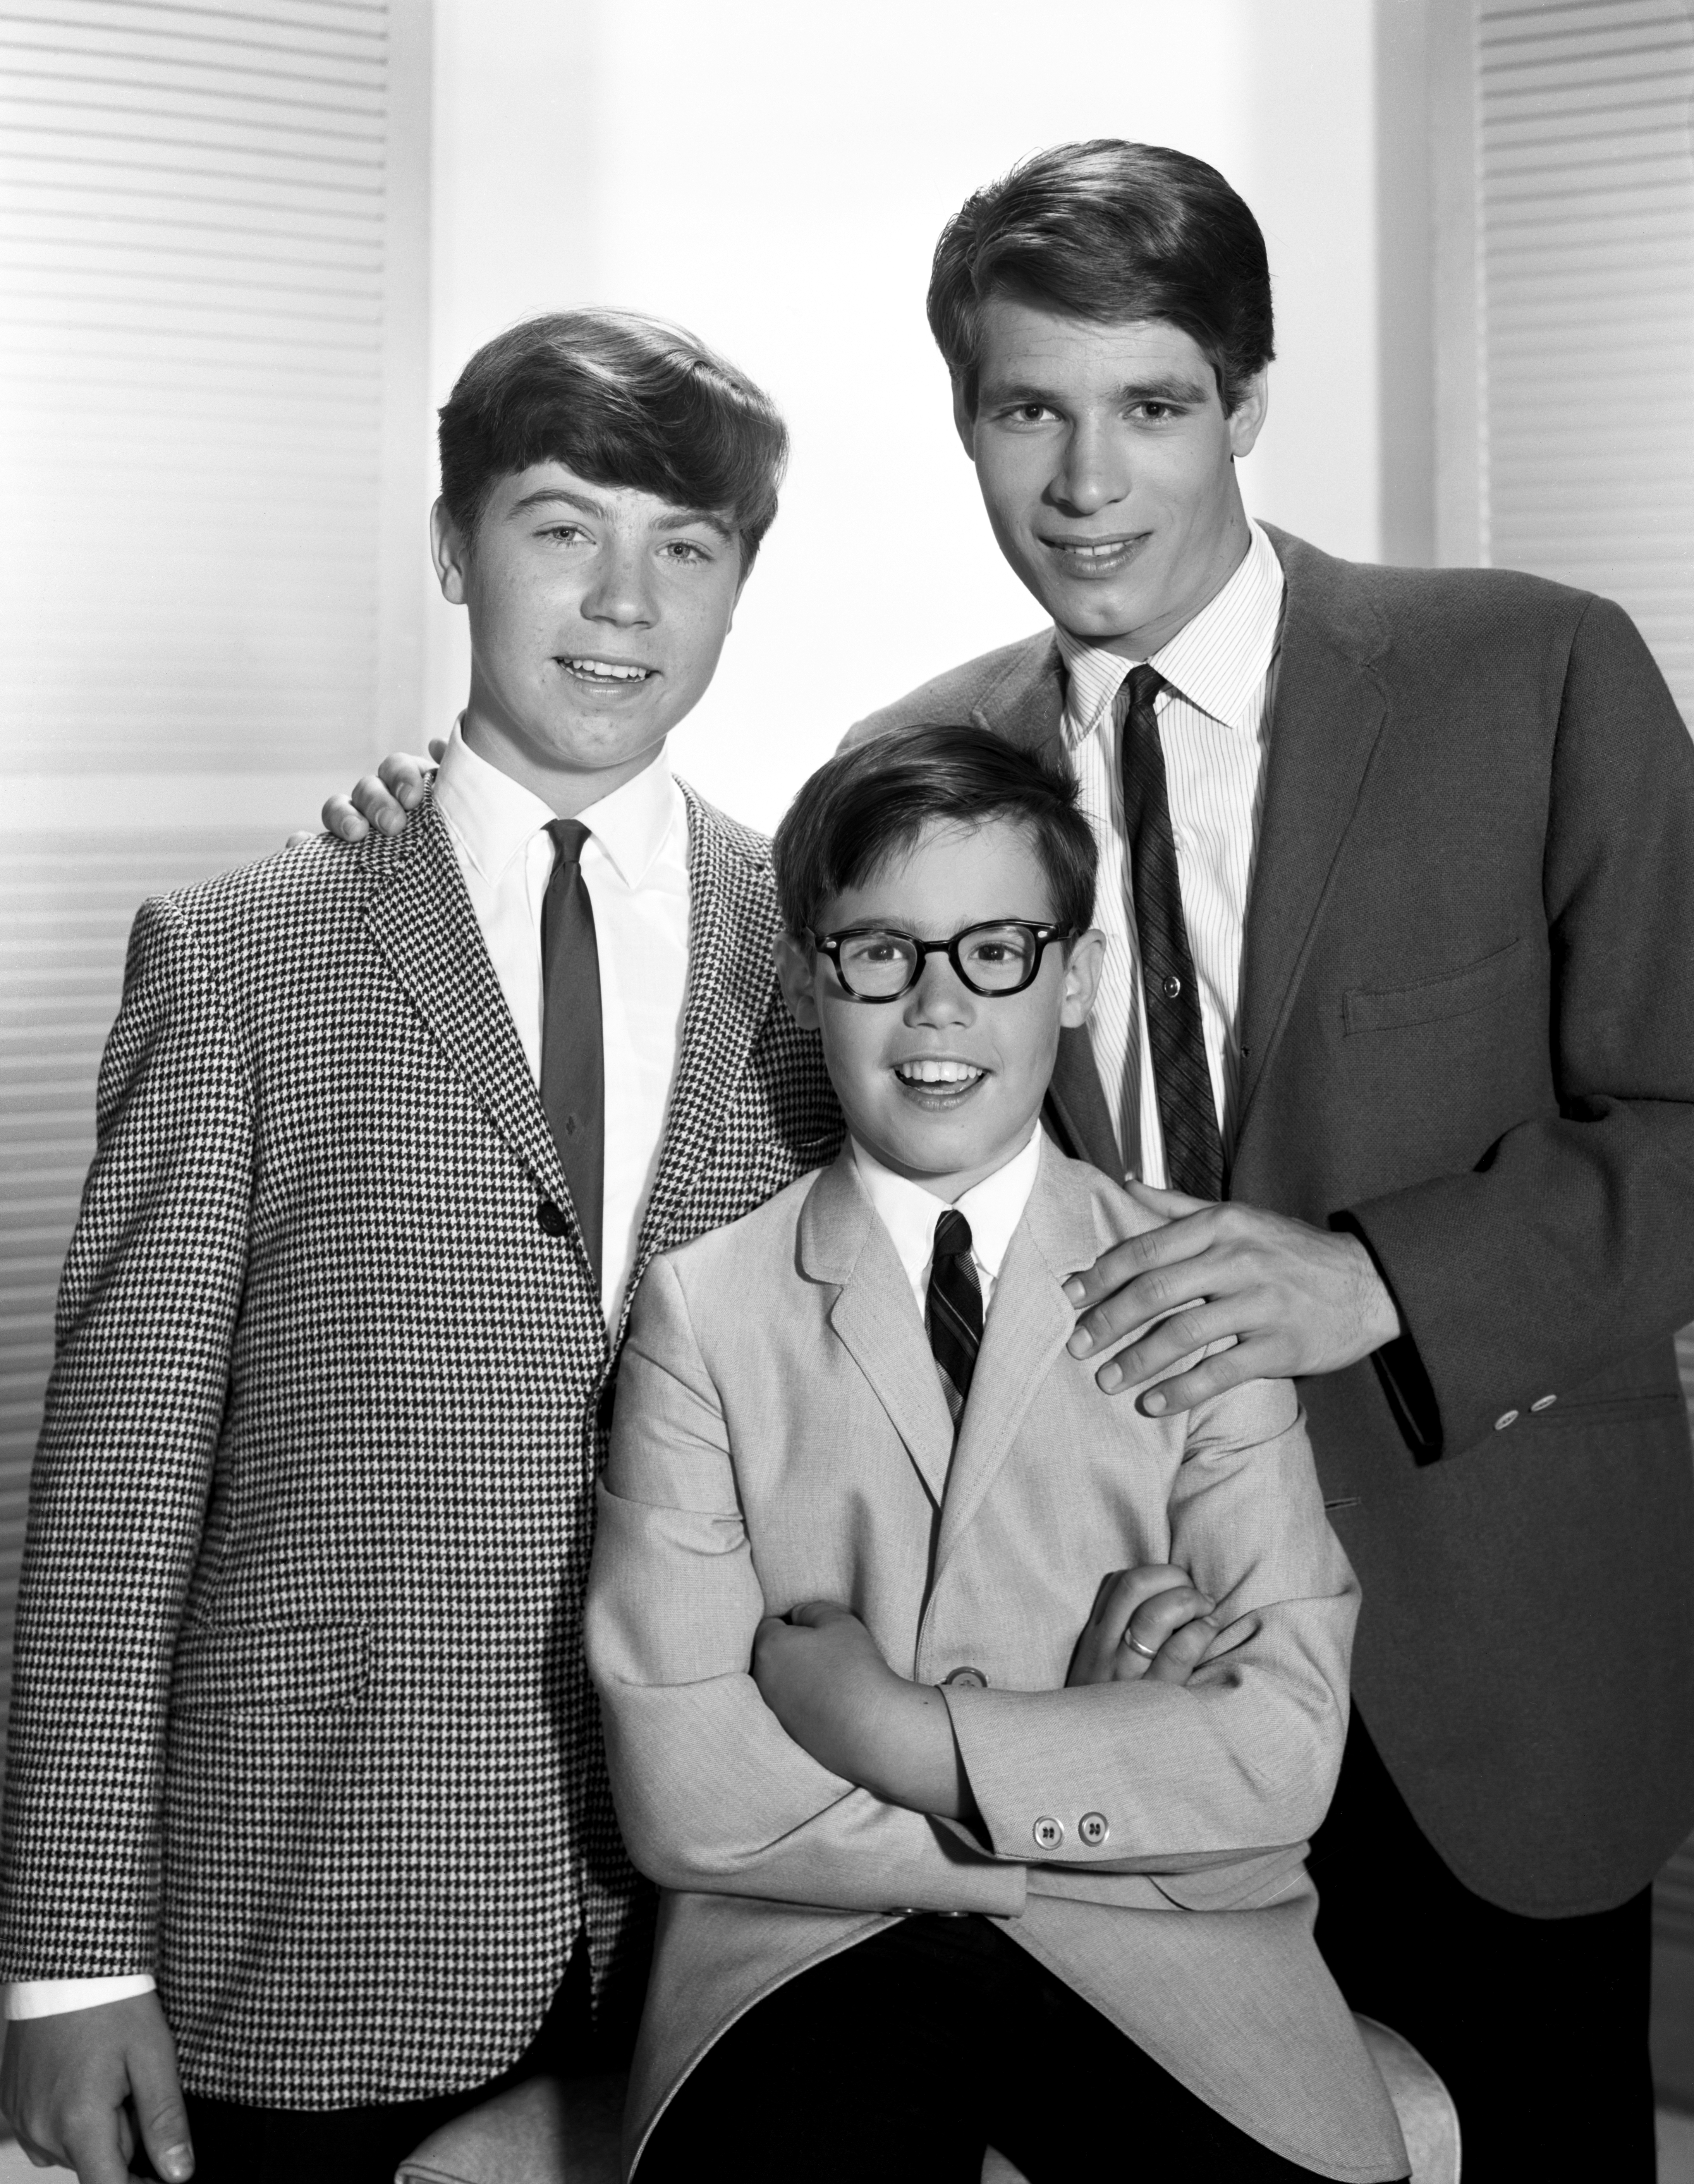 Stanley and Barry Livingston with Don Grady as their characters from "My Three Sons" in Los Angeles, California on May 8, 1965 | Source: Getty Images